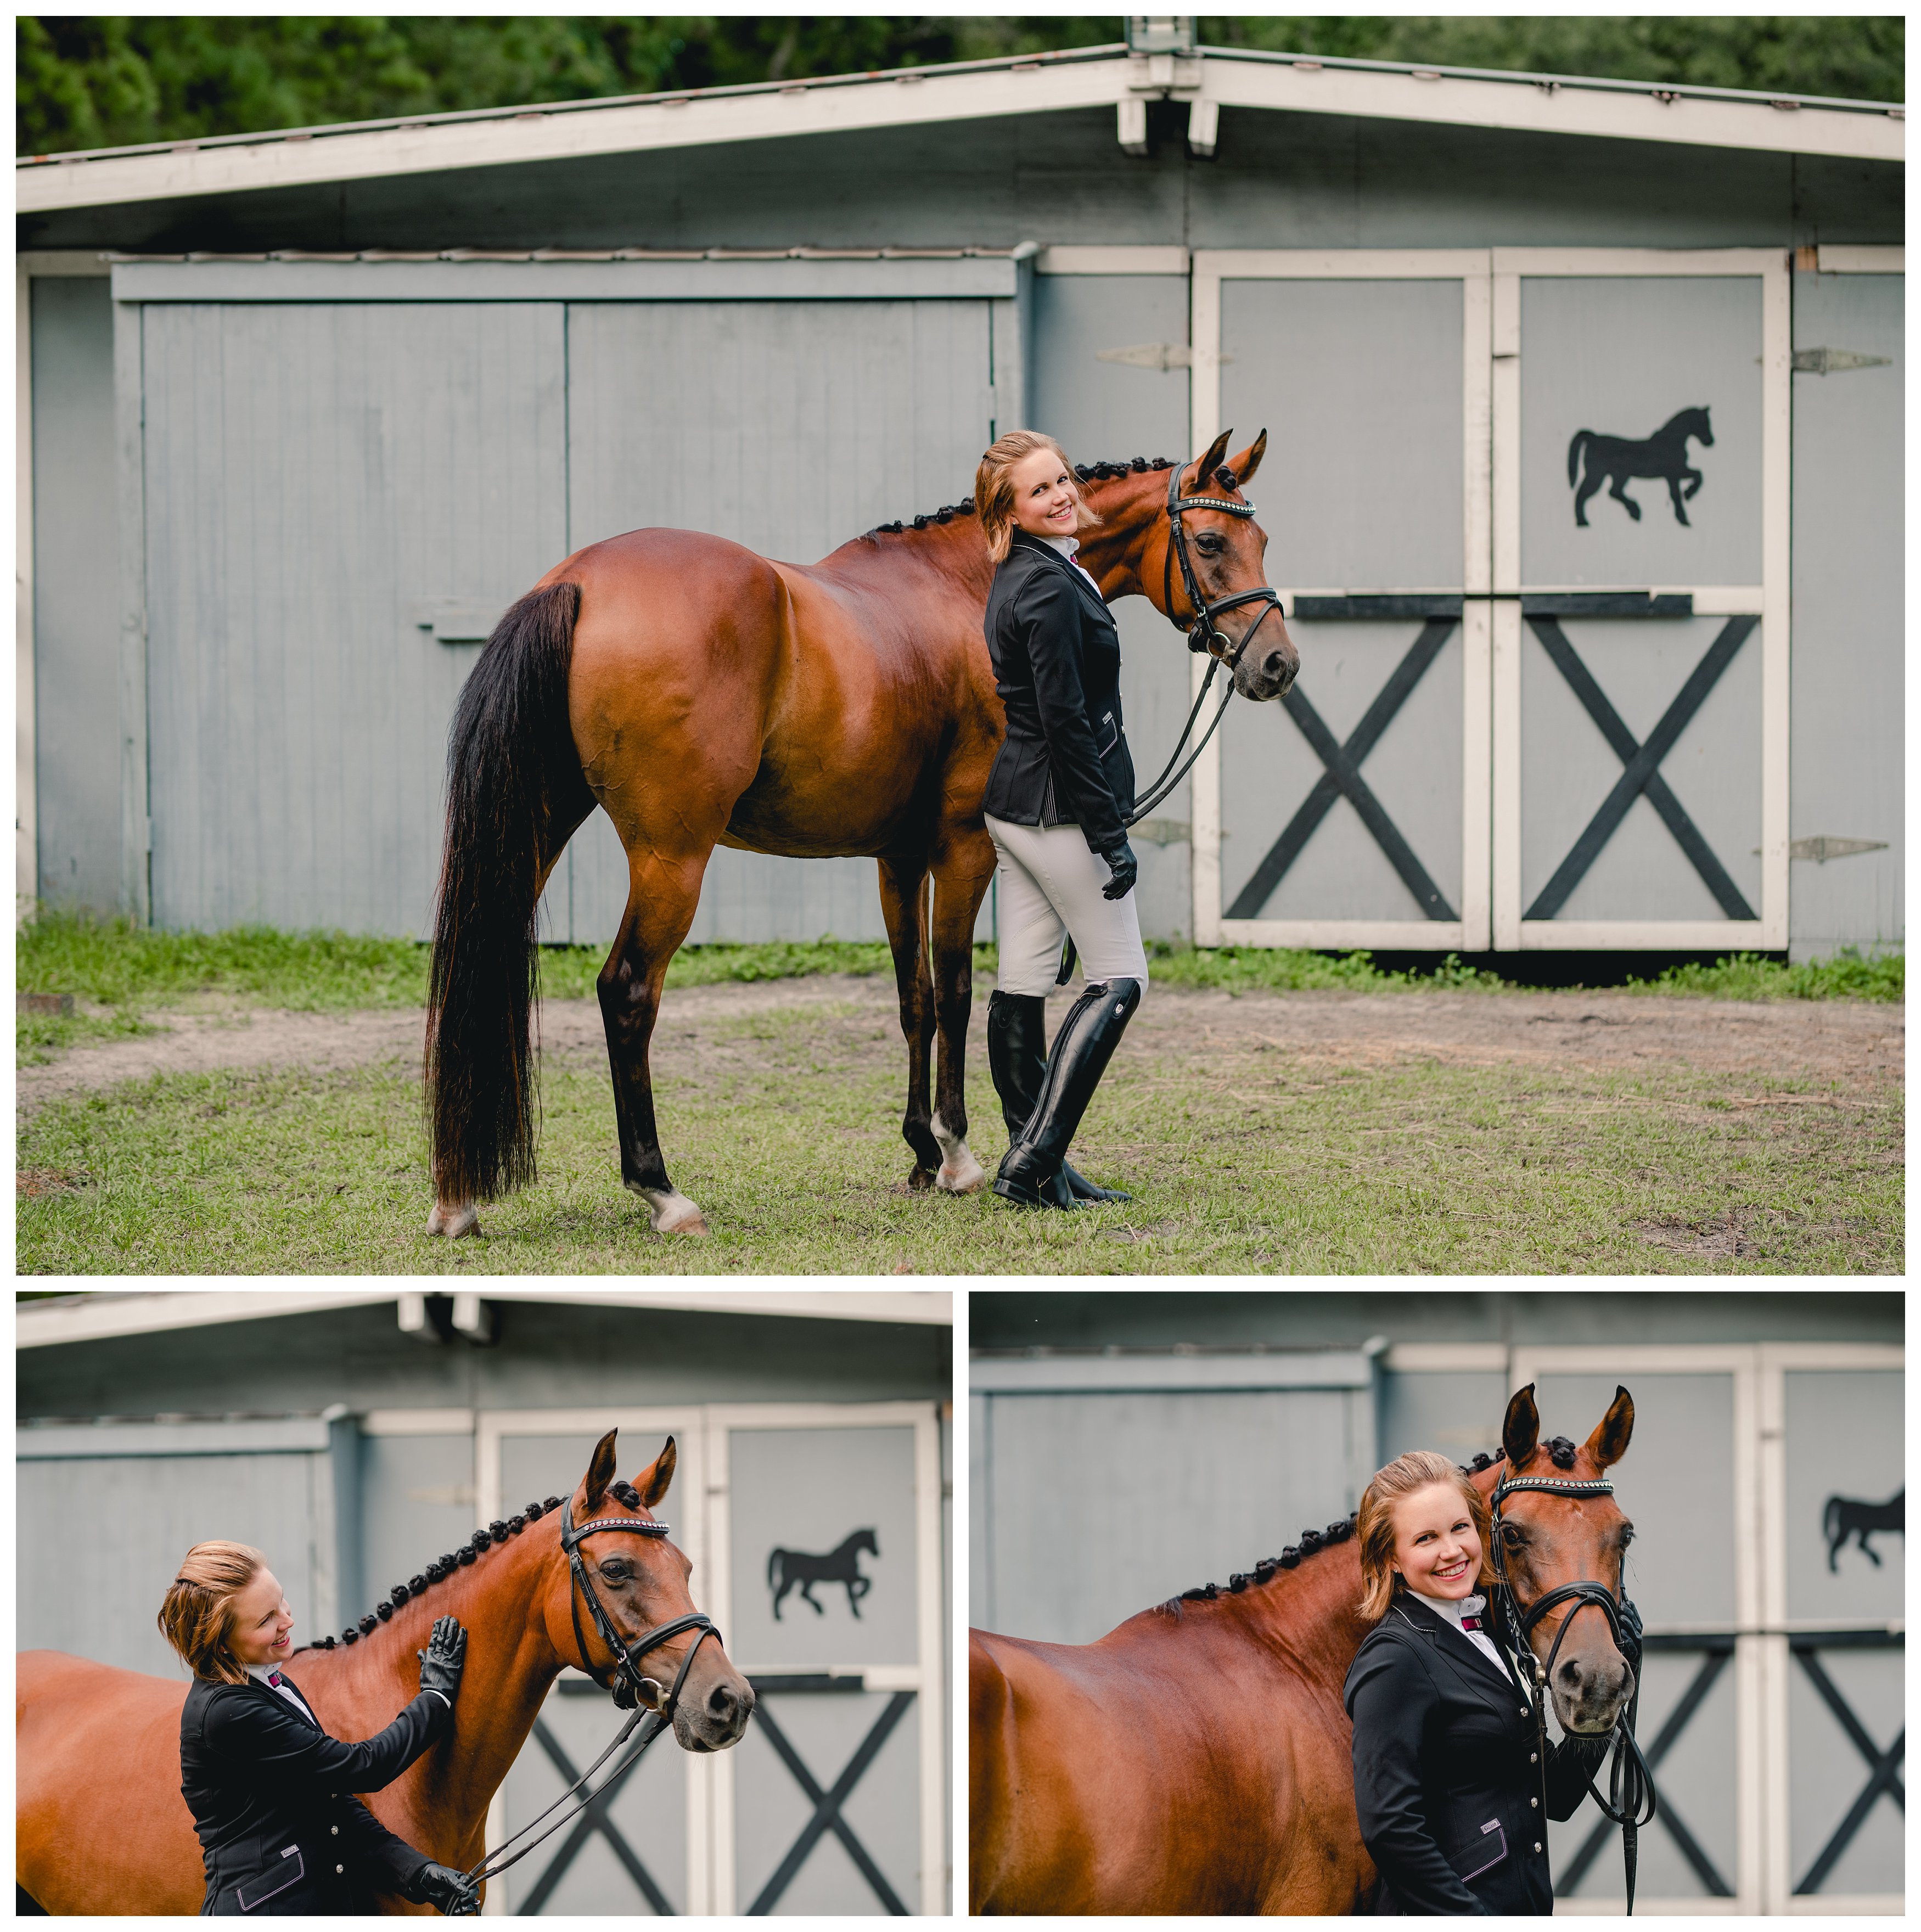 Simple posing ideas for horse and rider photo sessions in dressage show clothes.